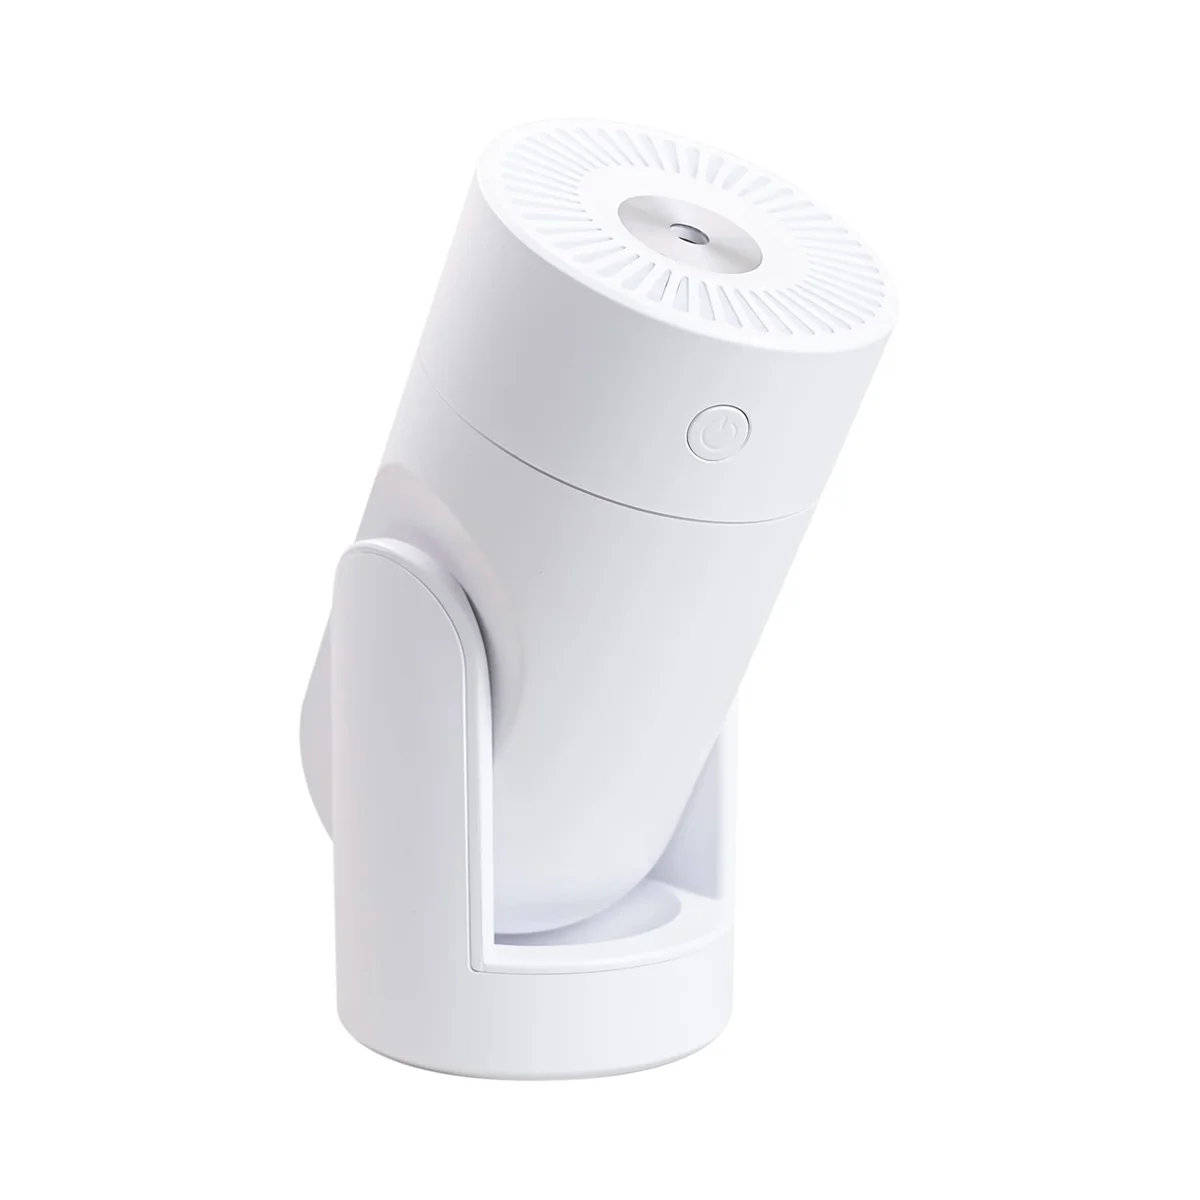 

Portable Humidifier By Mini Humidifier for Anywhere Including the Car Office Desk or Nightstand